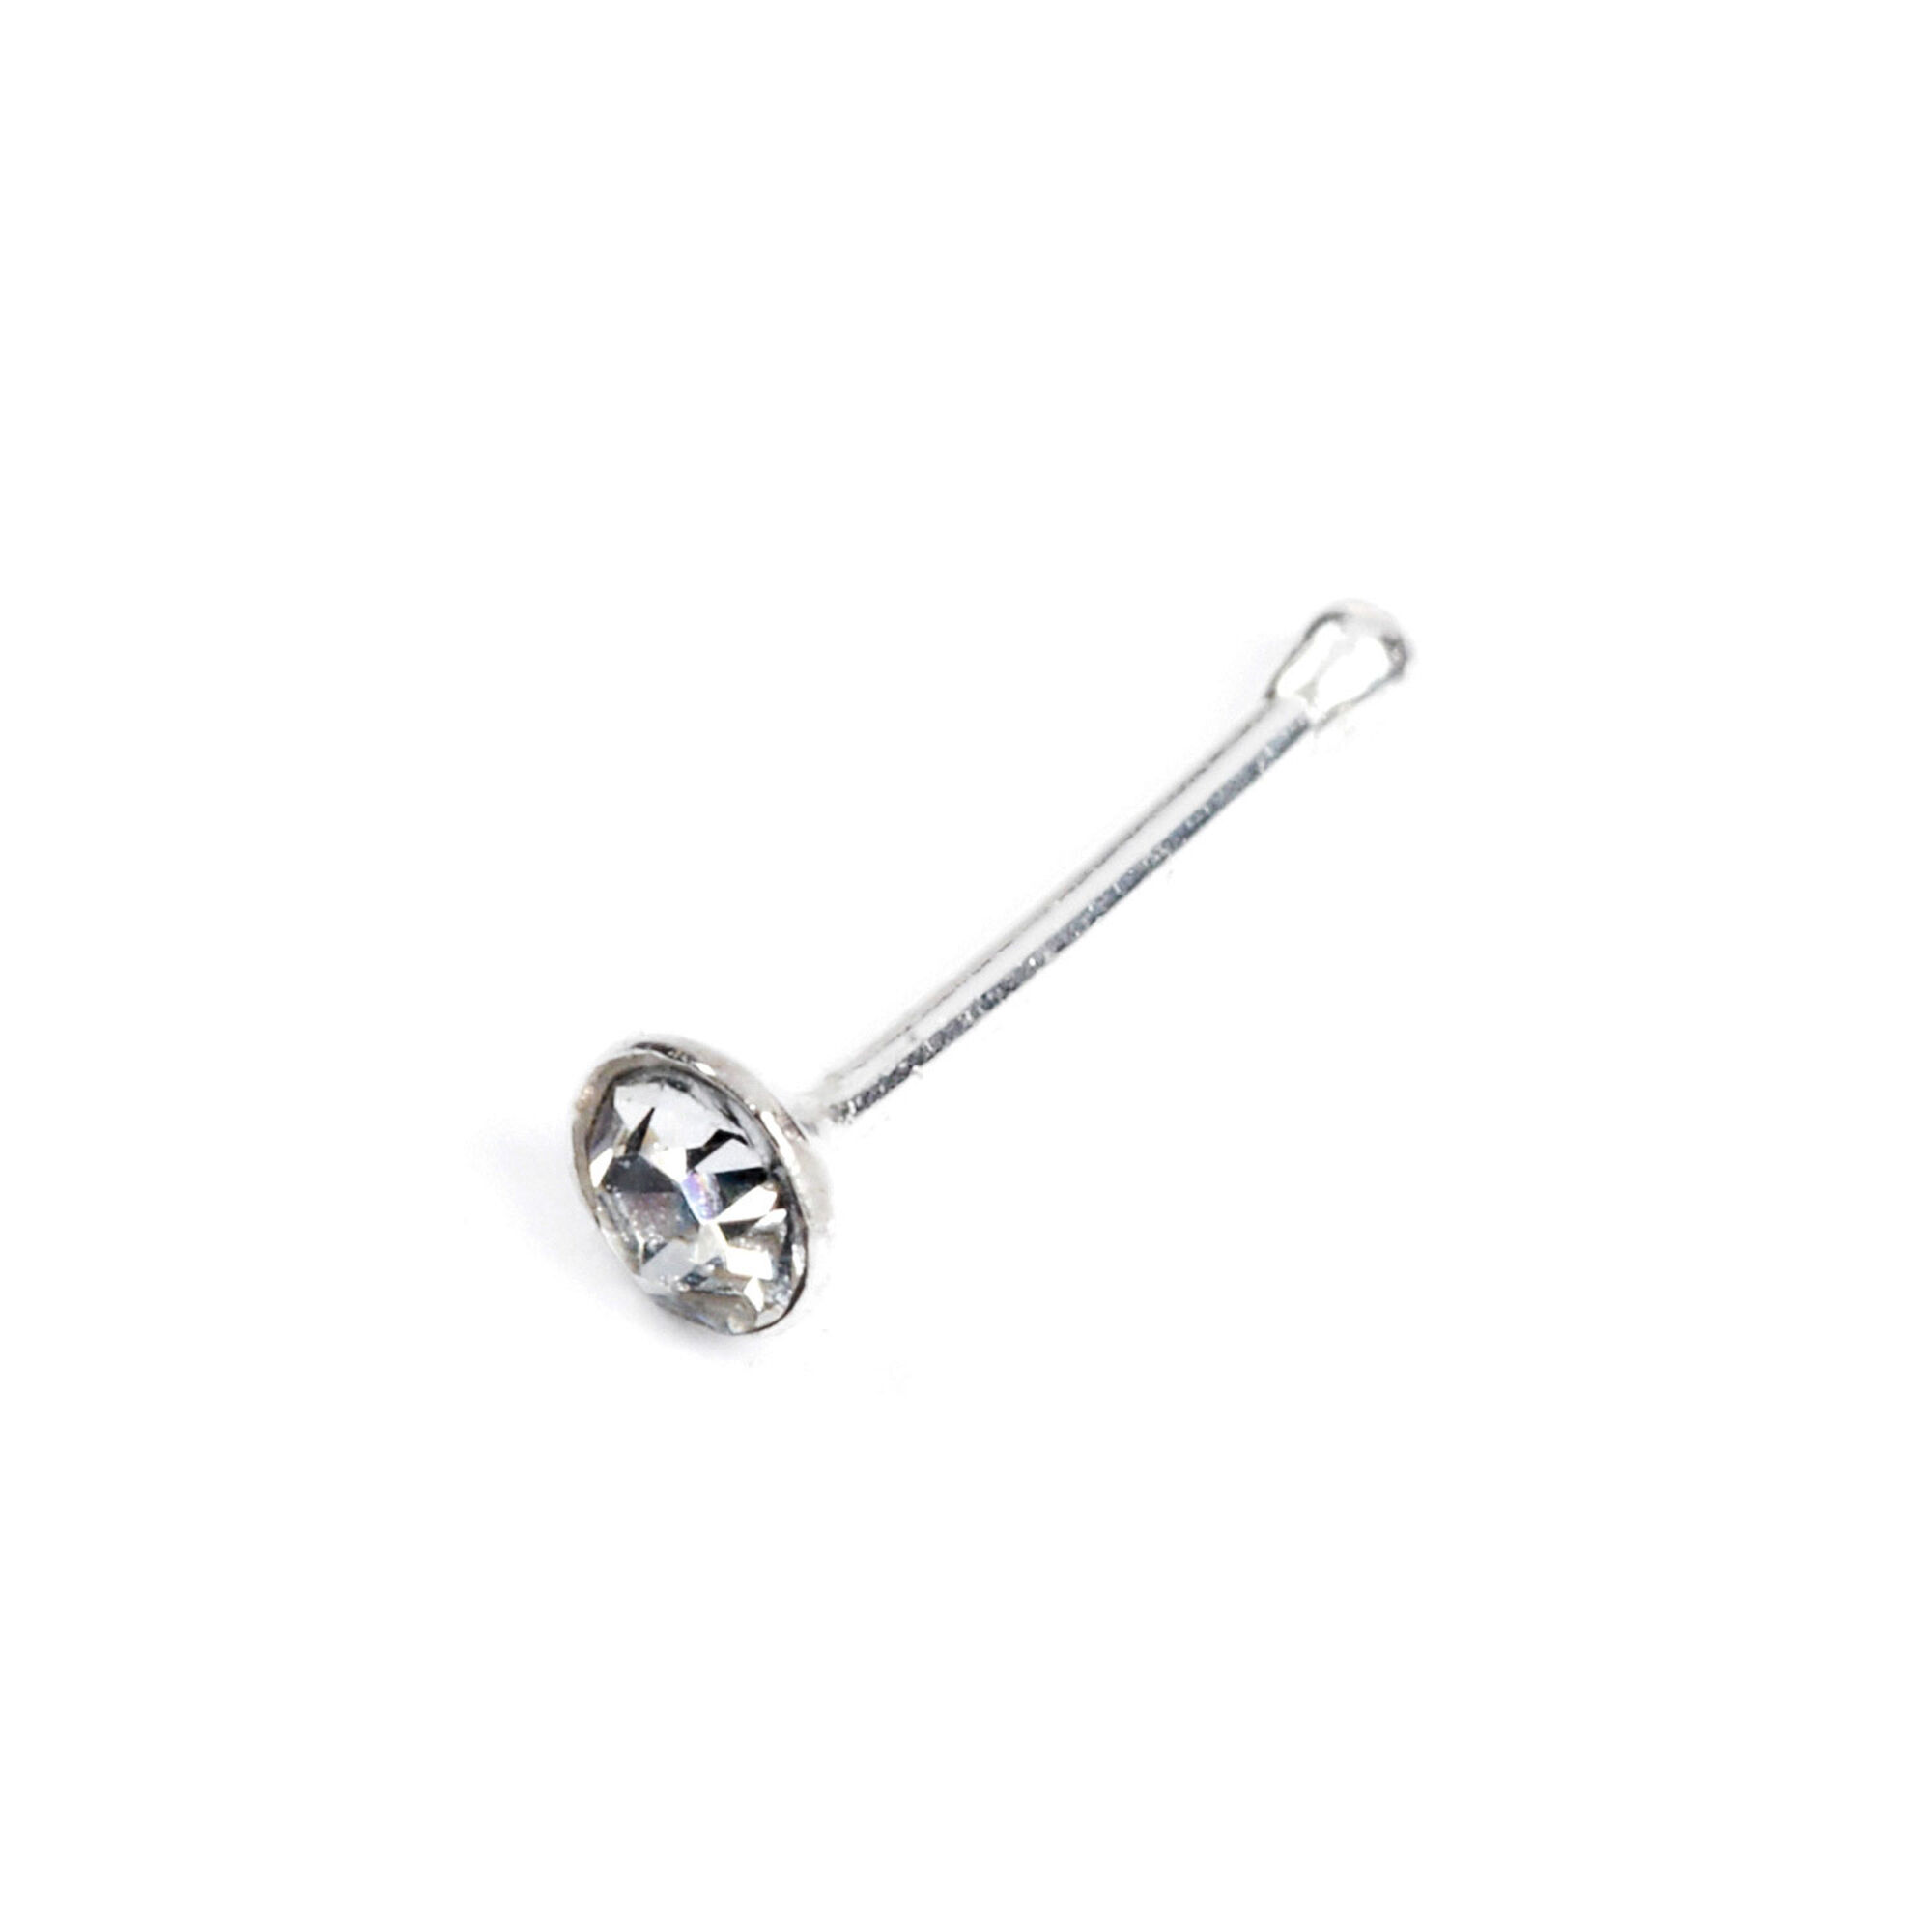 View Claires 20G Crystal Nose Stud Silver information